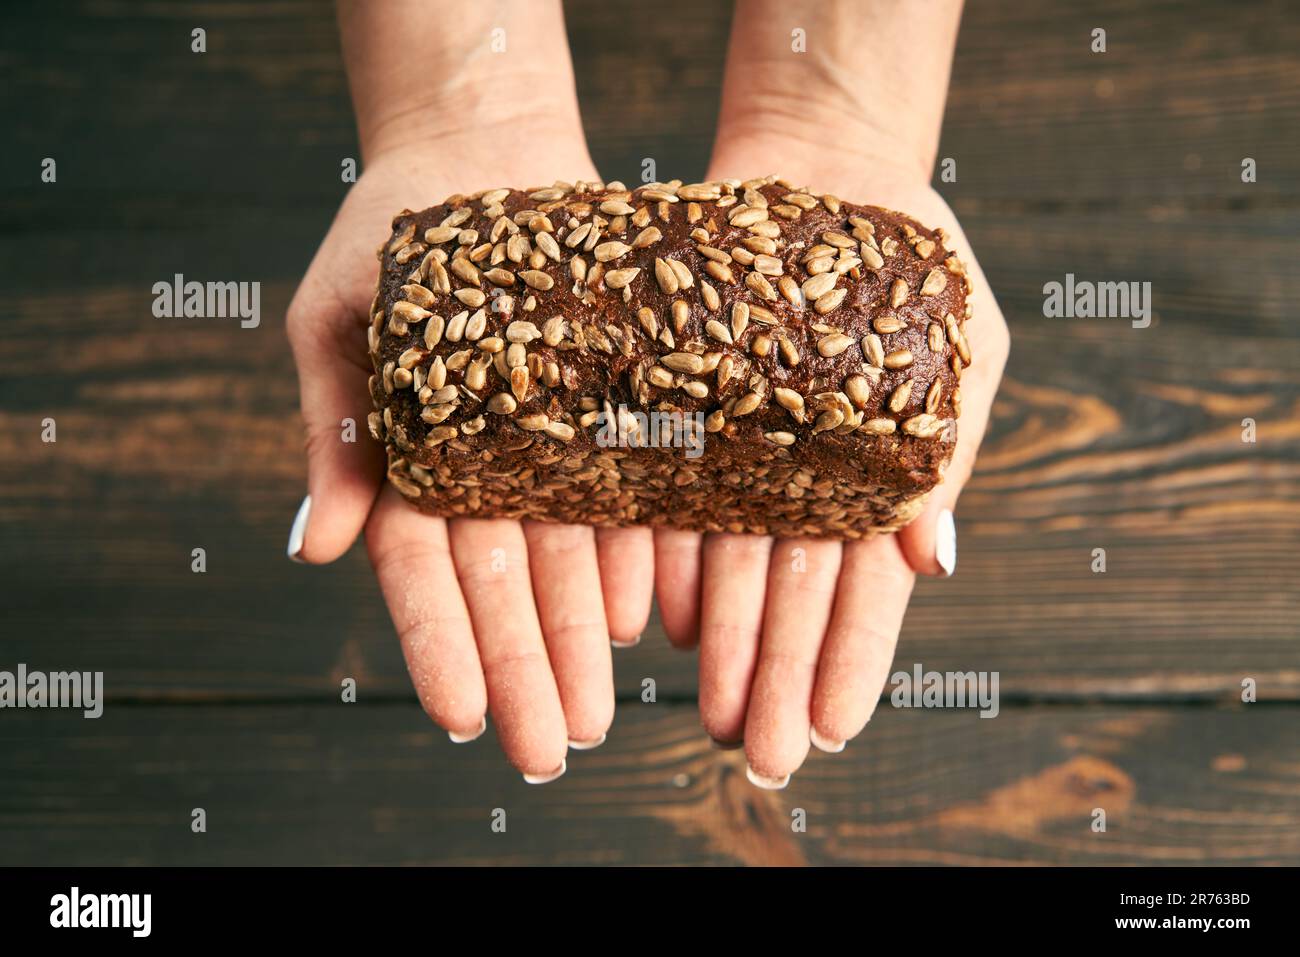 Loaf of fresh made rye multigrain bread in woman hands on wooden table background. Bakery, food concept Stock Photo